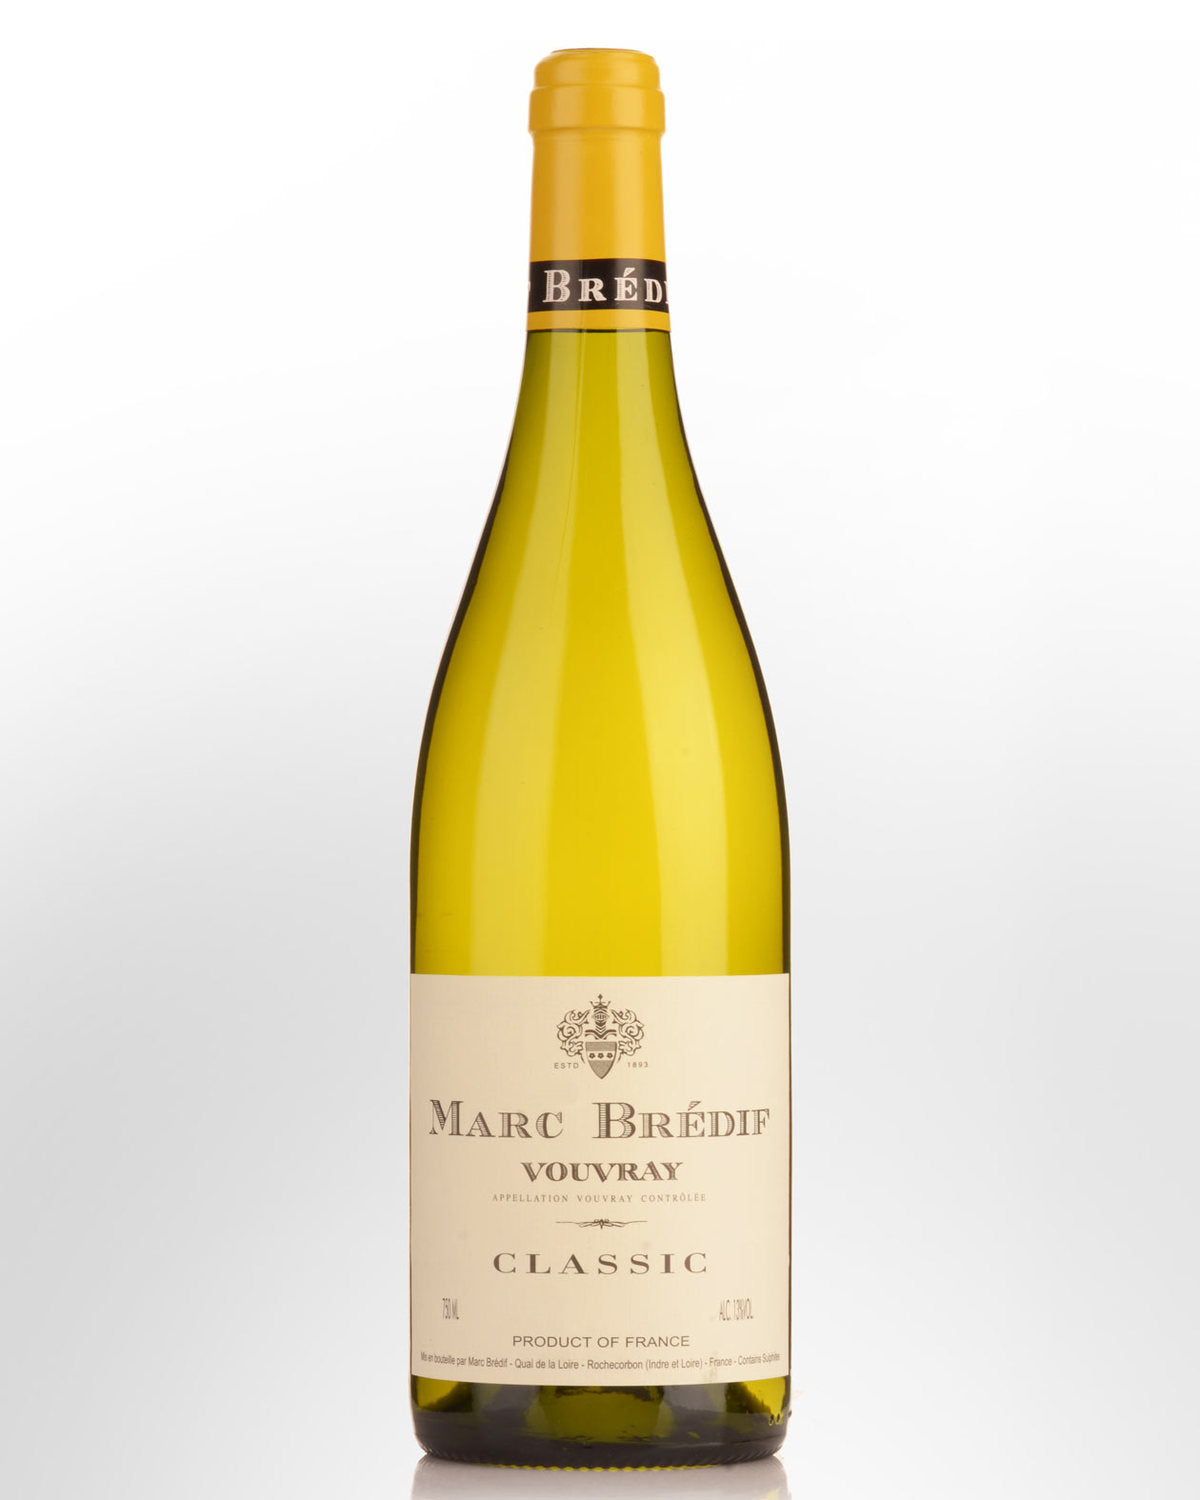 MARC BREDIF VOUVRAY CLASSIC